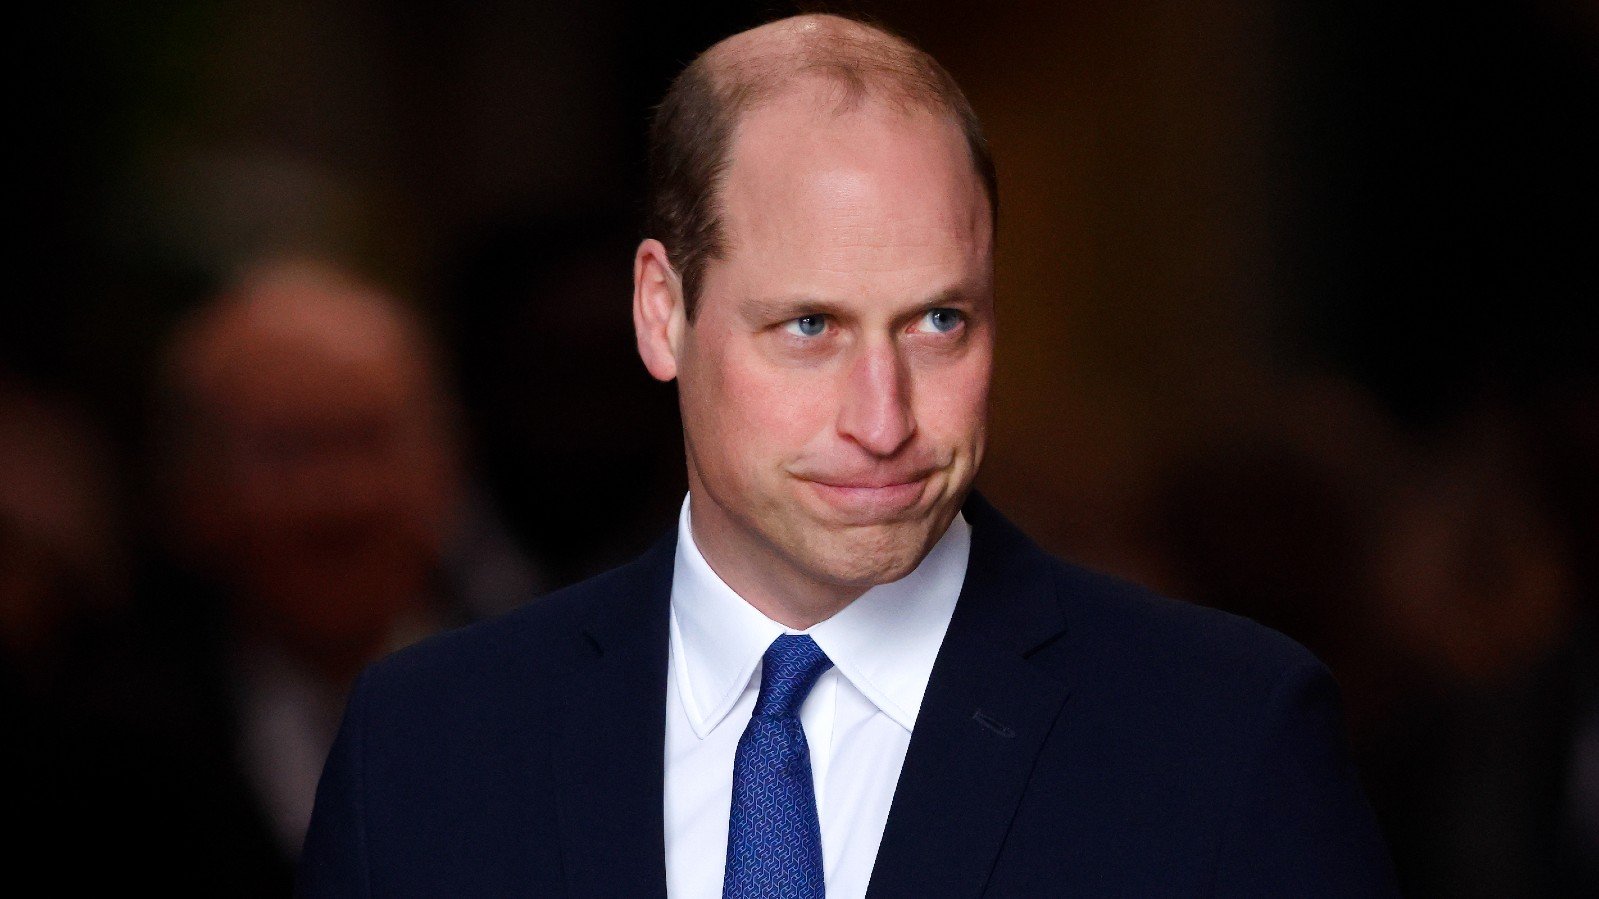 “Short Tempered” Prince William Can Be “Difficult” to Work With, Royal Expert Says